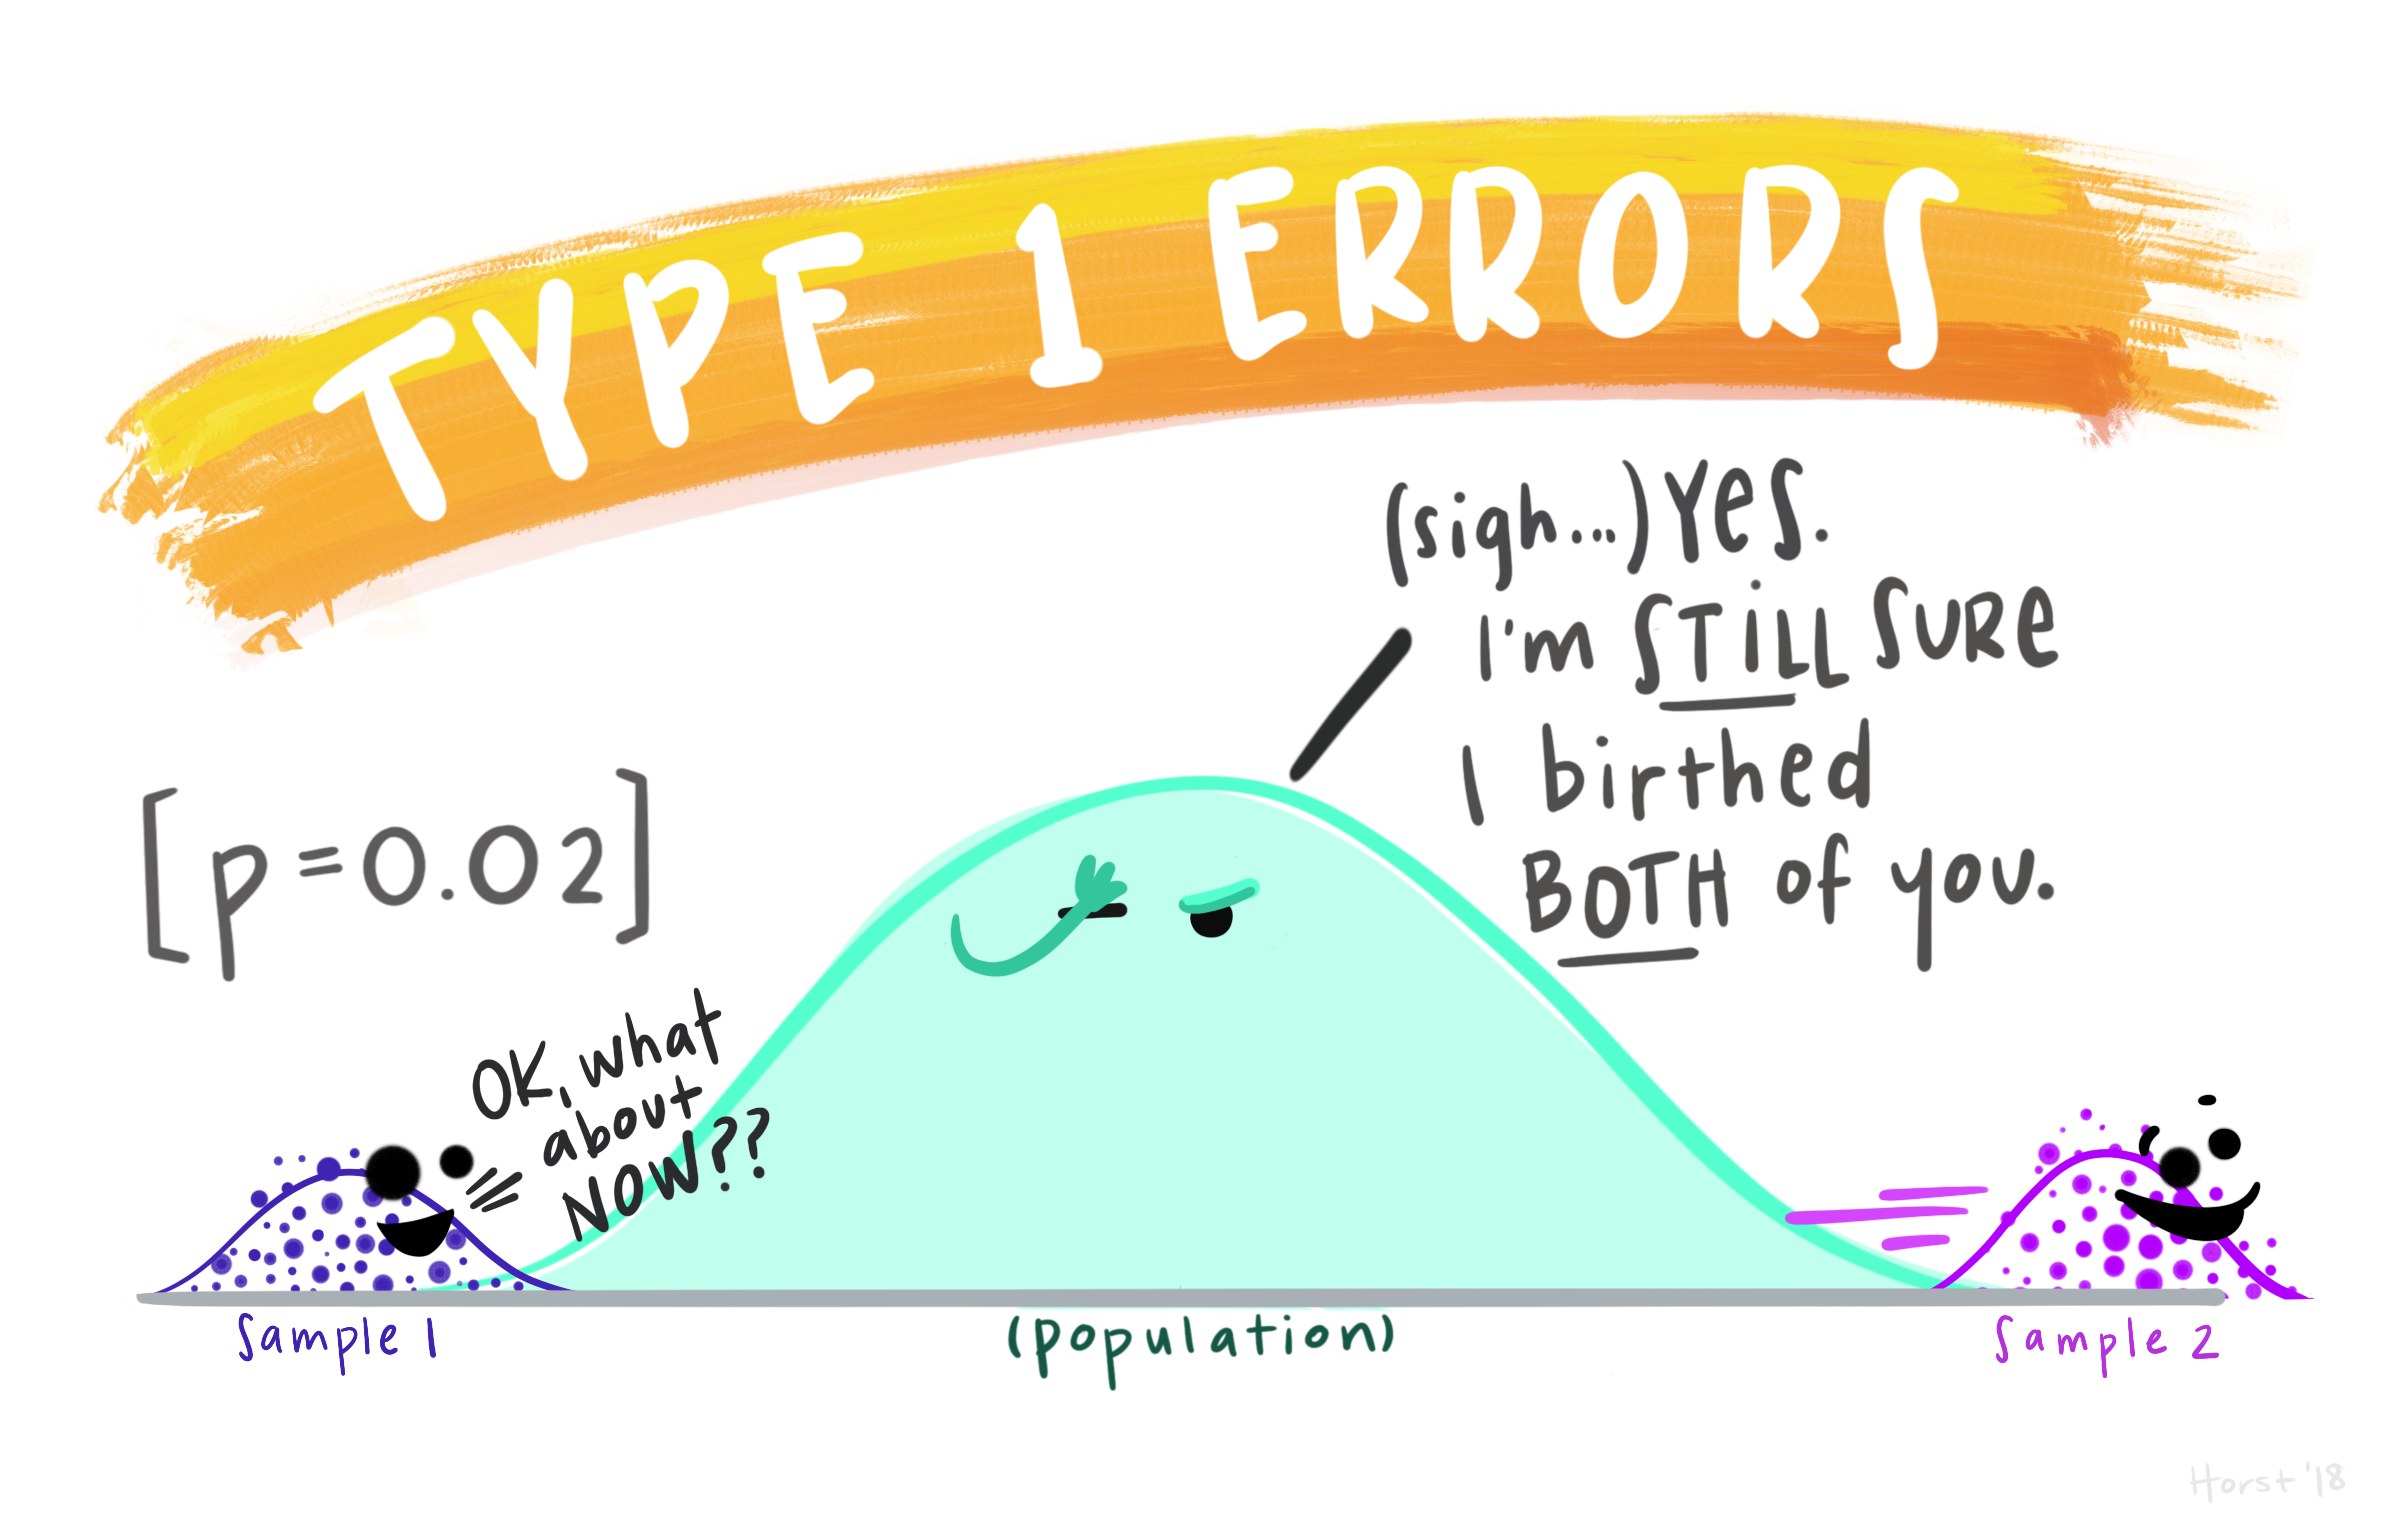 A type I error: falsely rejecting \(H_0\). We think we have discovered something ‘interesting’ in our data, but have been deceived by random variation. Artwork by @allison_horst.